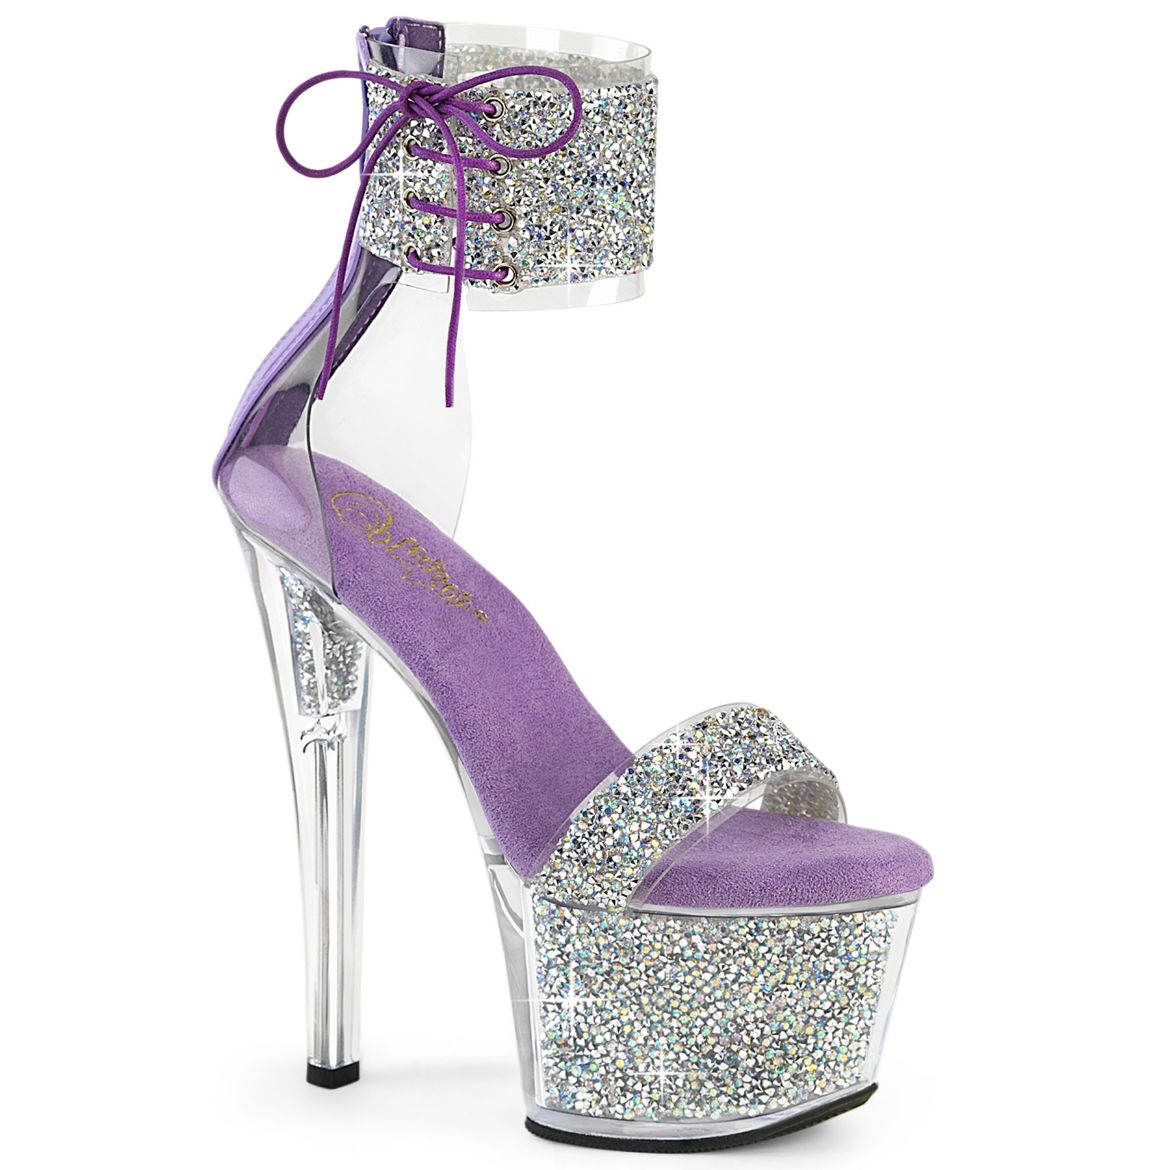 Product image of Pleaser SKY-327RSI Slv Multi RS-Lavender/Slv RS 7 Inch Heel 2 3/4 Inch PF Ankle Cuff Sandal w/RS Back Zip